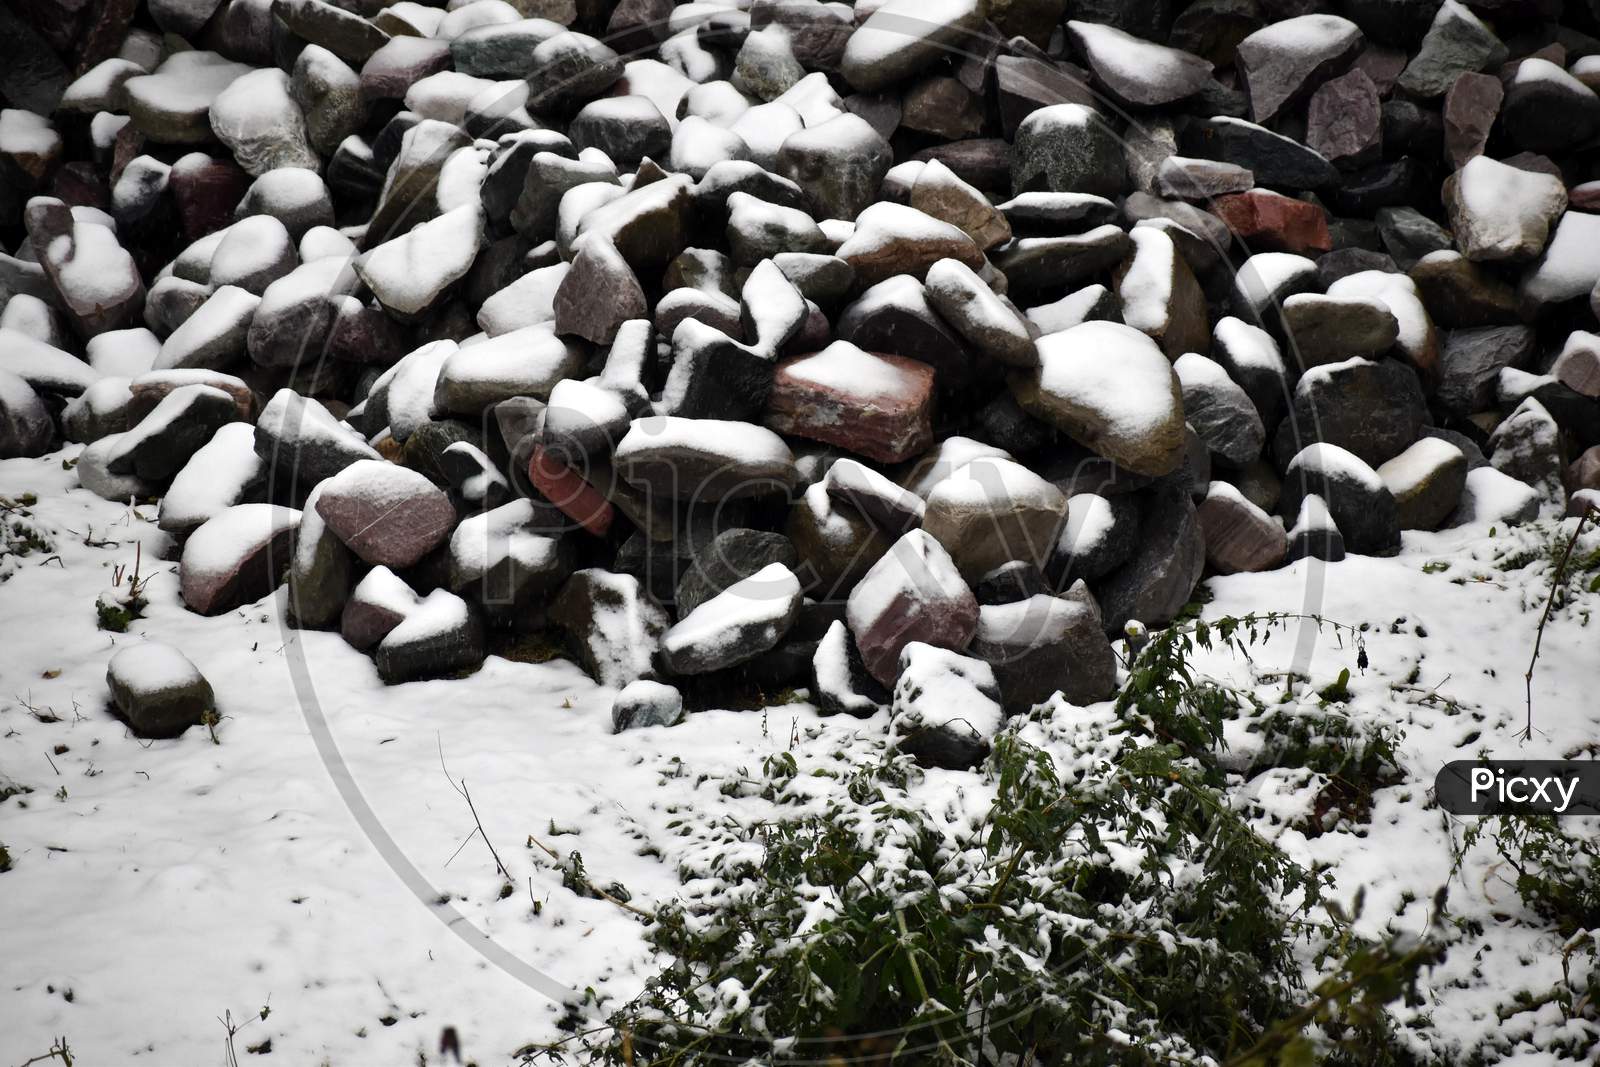 Beautiful Picture Of Snow On Stones